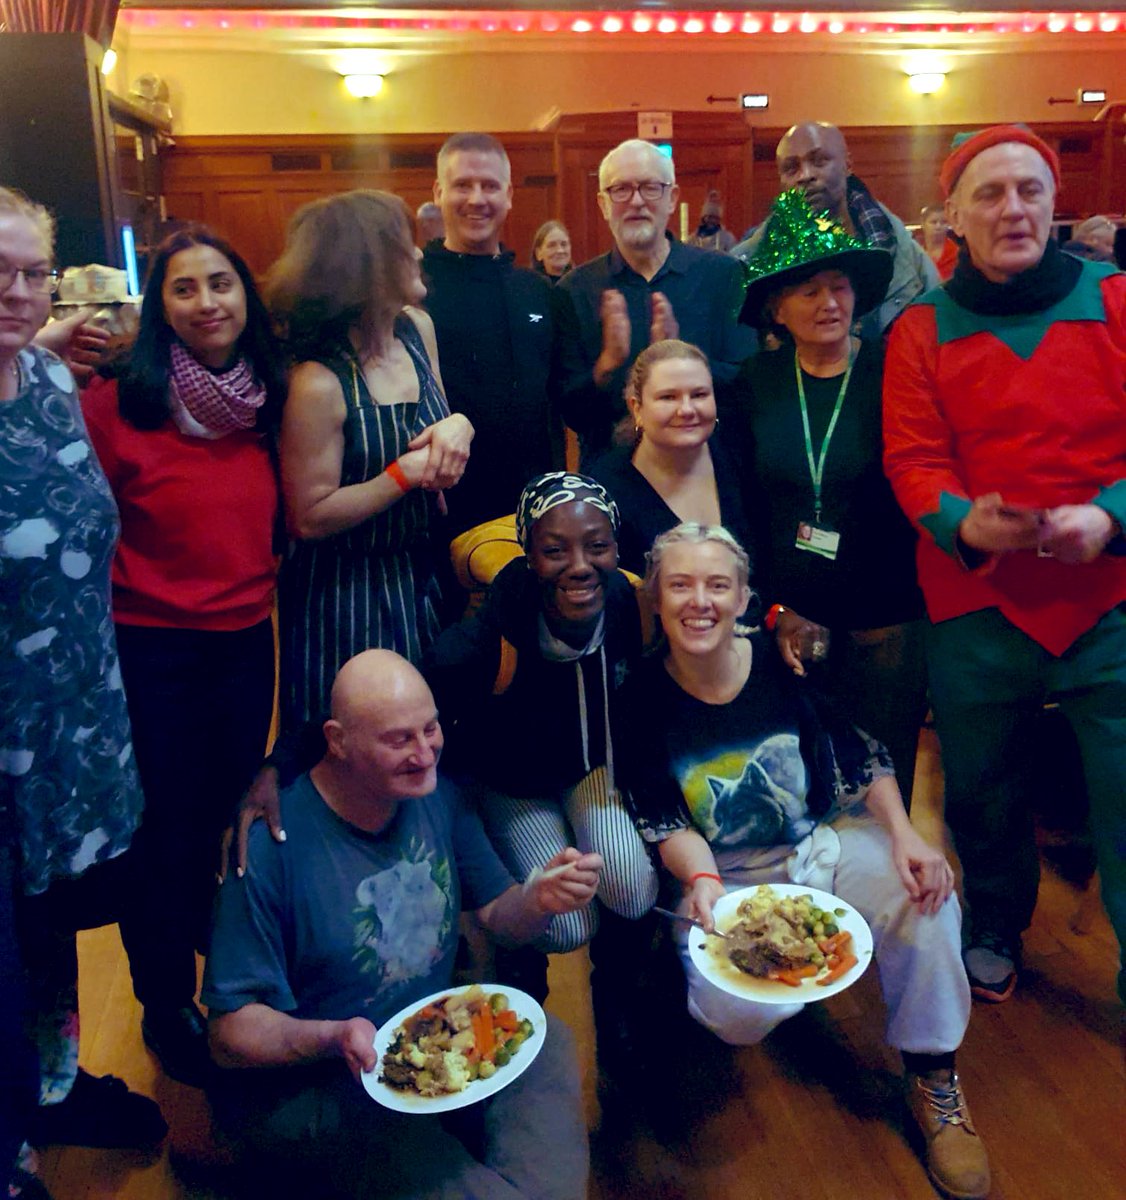 A wonderful day at Islington Town Hall with @streetskitchen supporting people who are homeless. Thank you to all those working over the festive period, to foodbank volunteers, and to unpaid carers looking after their loved ones. Wishing everyone a Happy Christmas!